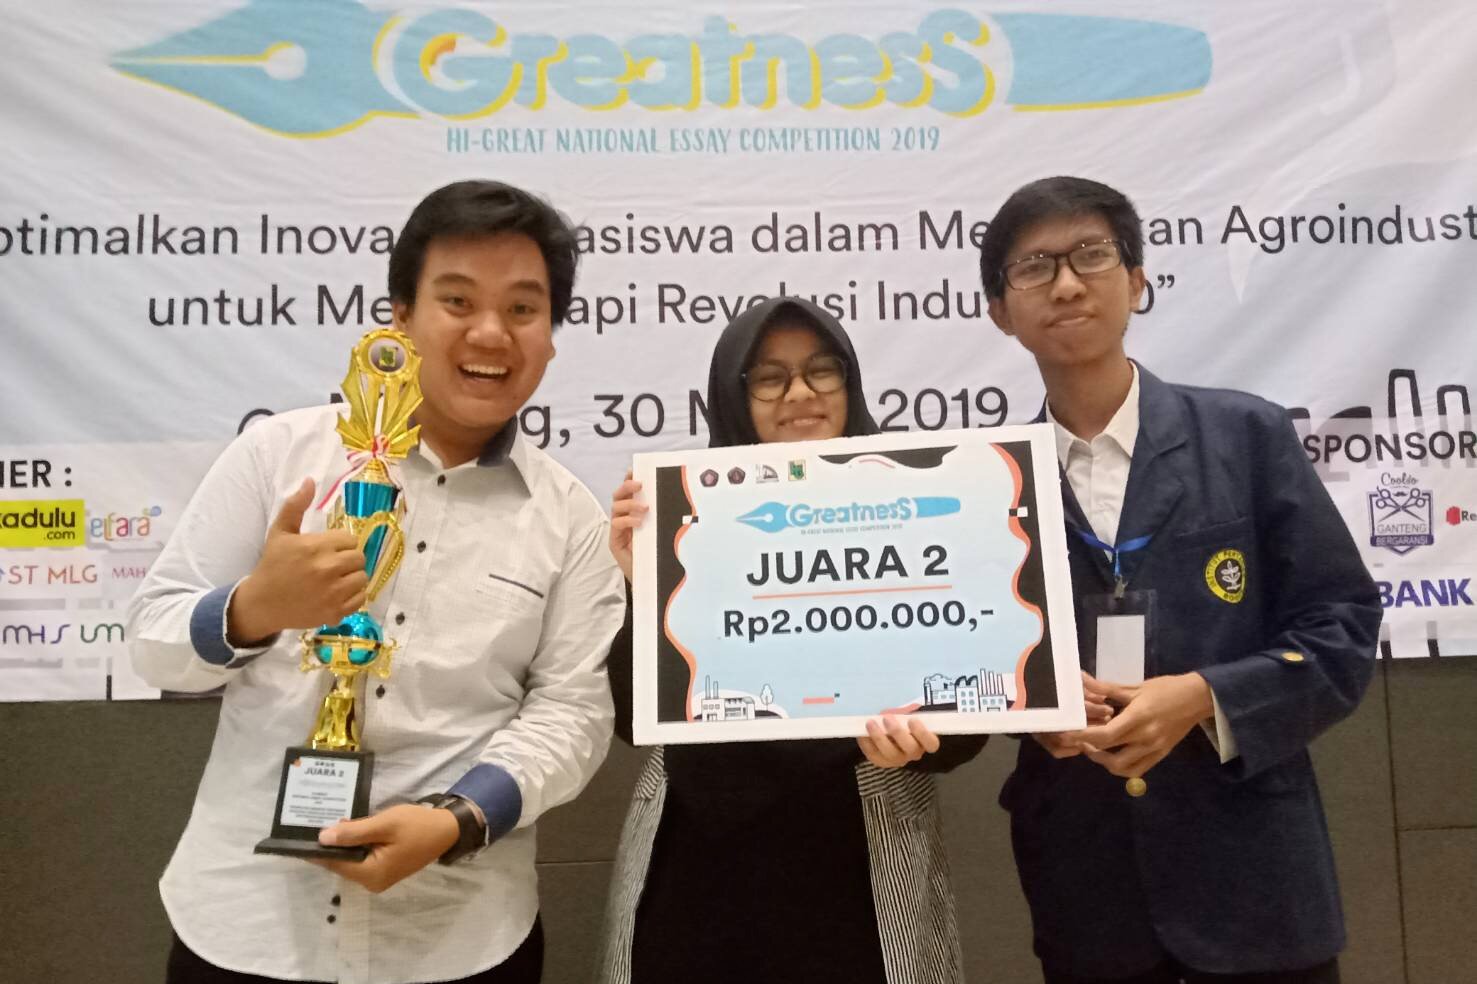 IPB University Students Design the Smart QC Application for Future Agriculture